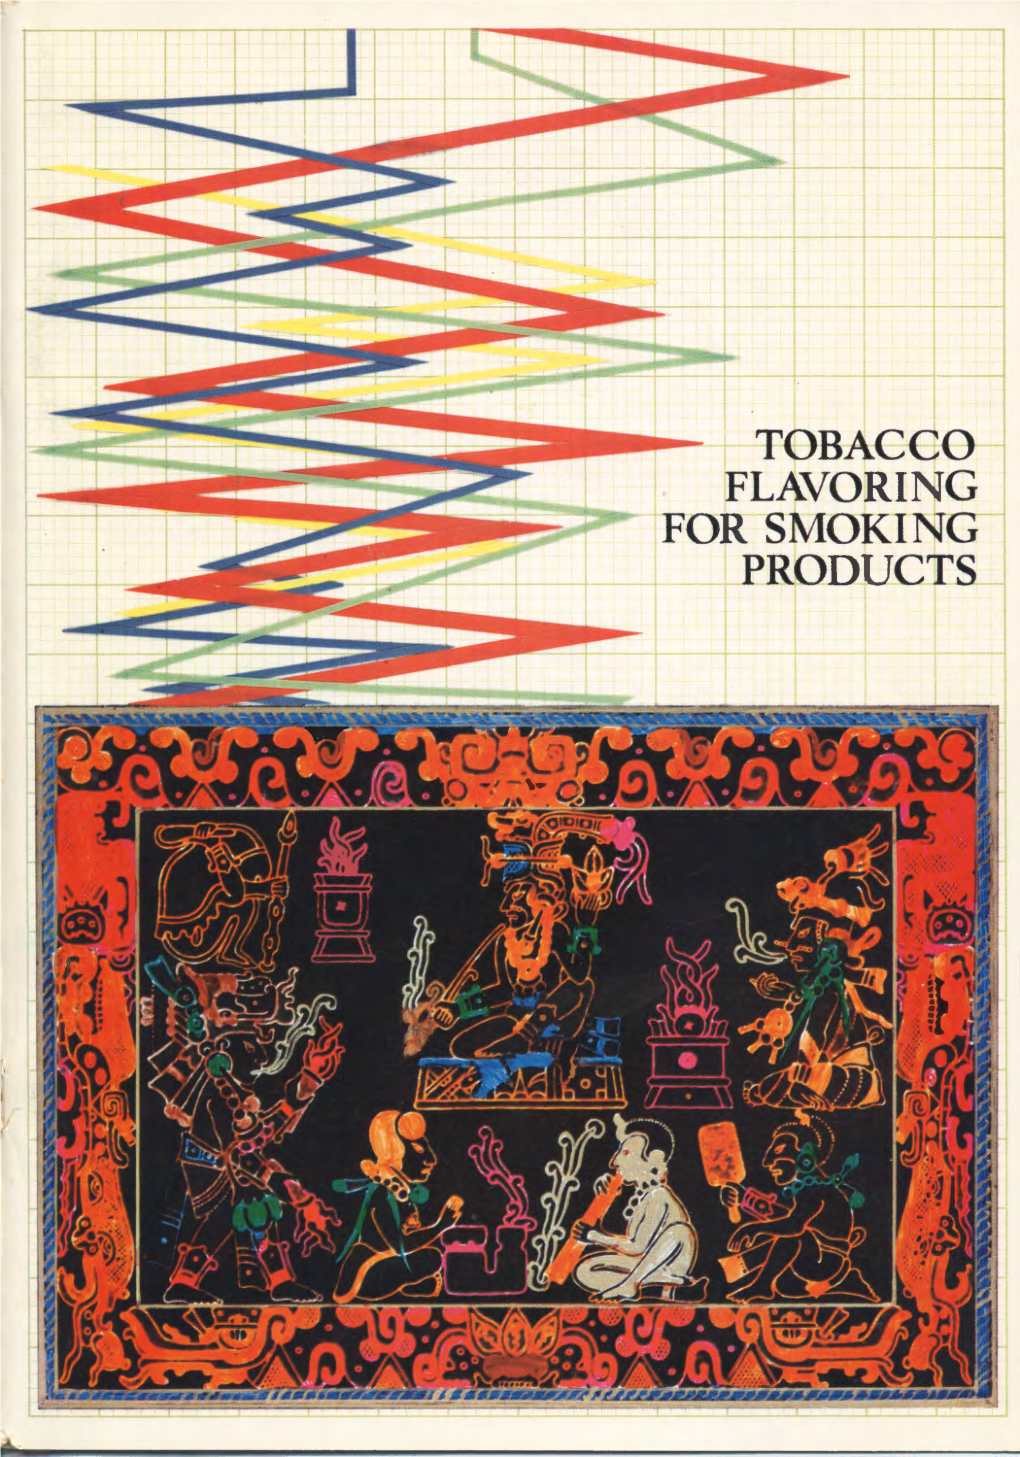 Tobacco Flavoring for Smoking Products